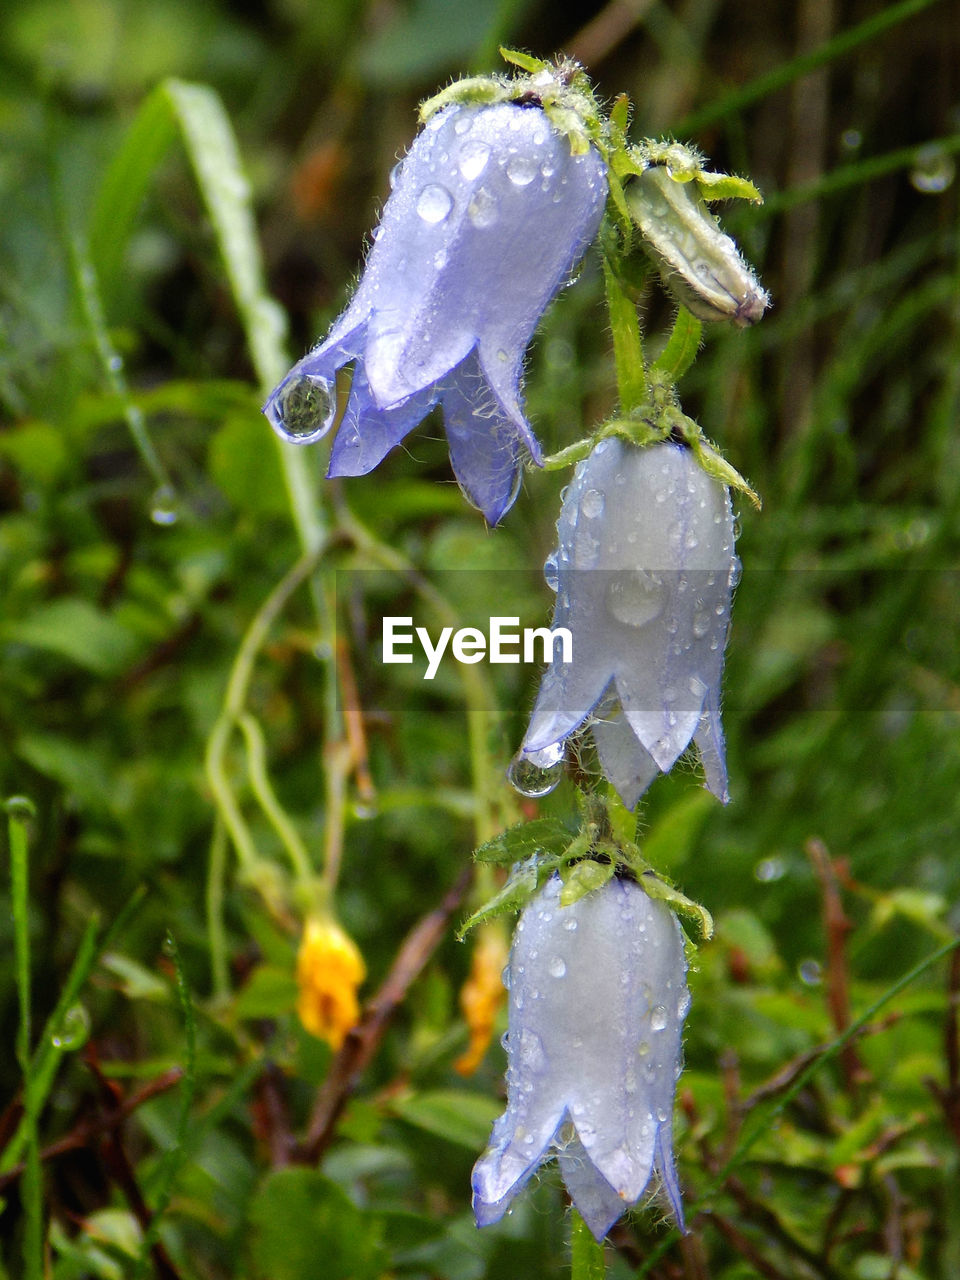 CLOSE-UP OF WET FLOWER IN SNOW